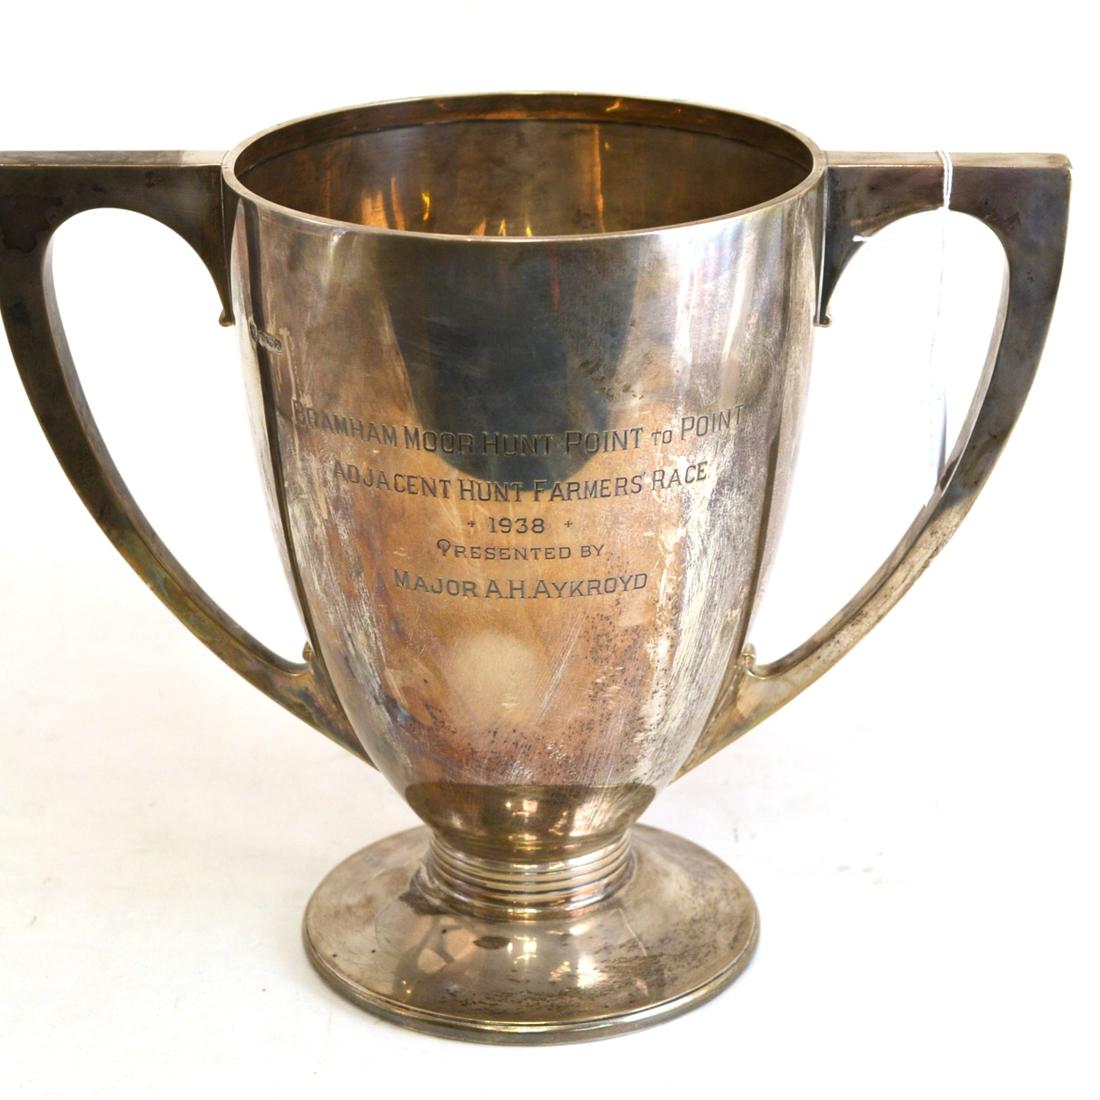 Art Deco silver twin handled trophy cup, Bramham Moor Hunt Point to Point Adjacent Hunt Farmers'